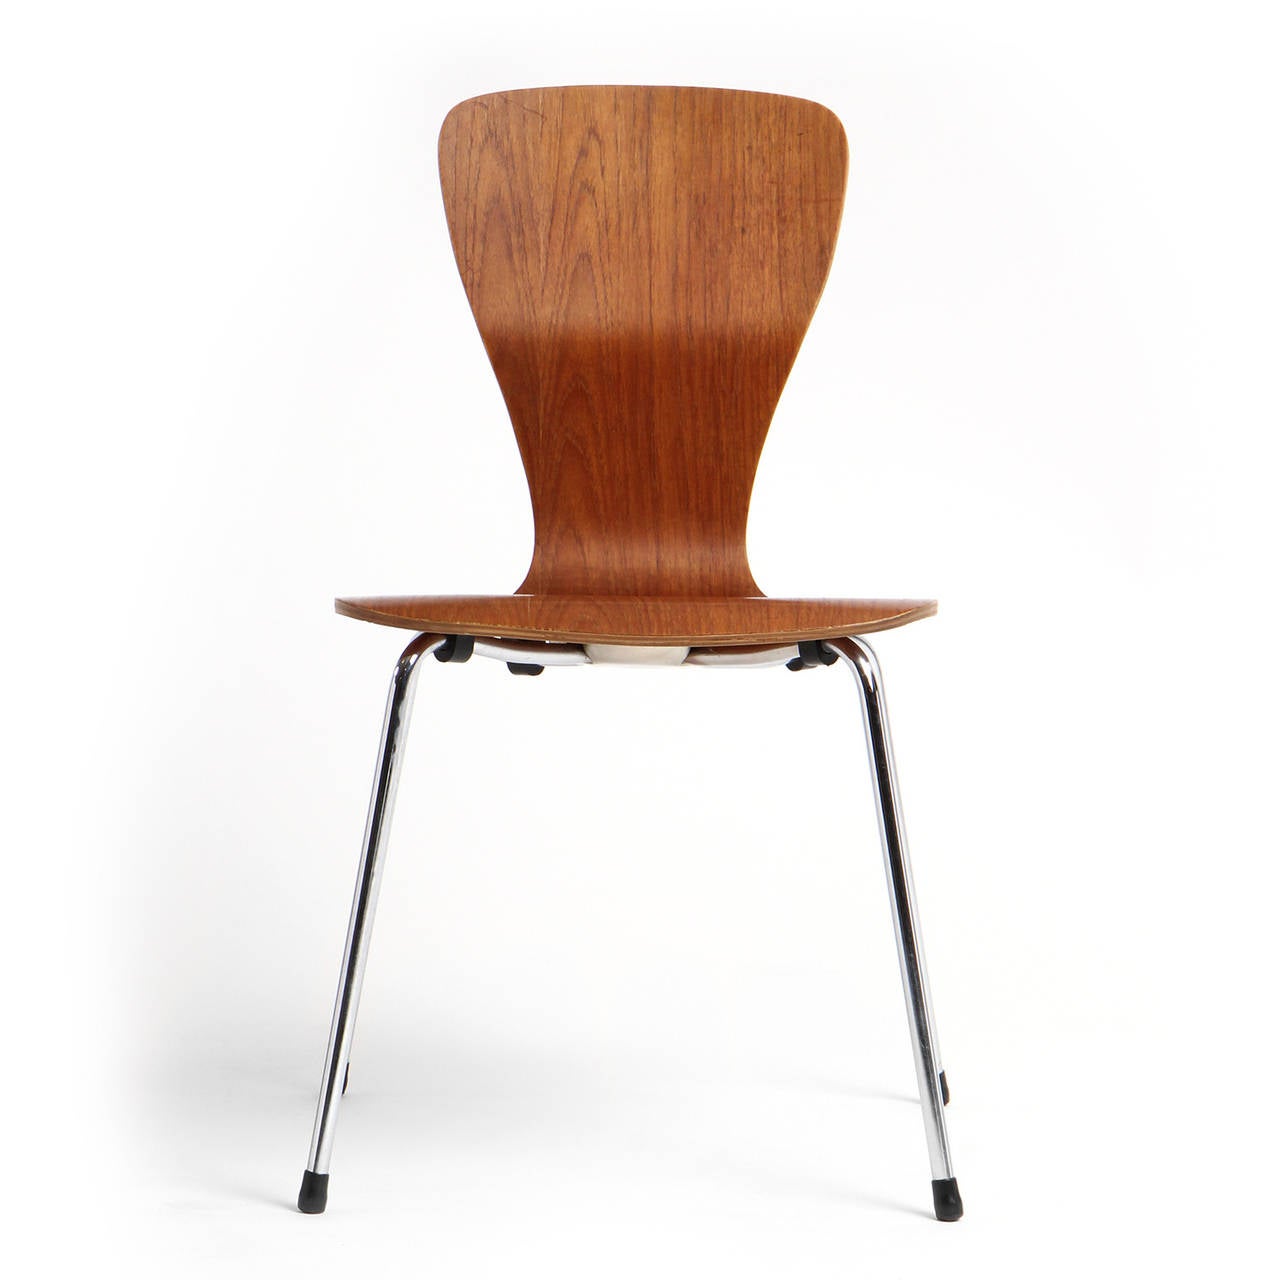 A side chair with a warm-toned undulating laminated teak seat on a chromed steel base.